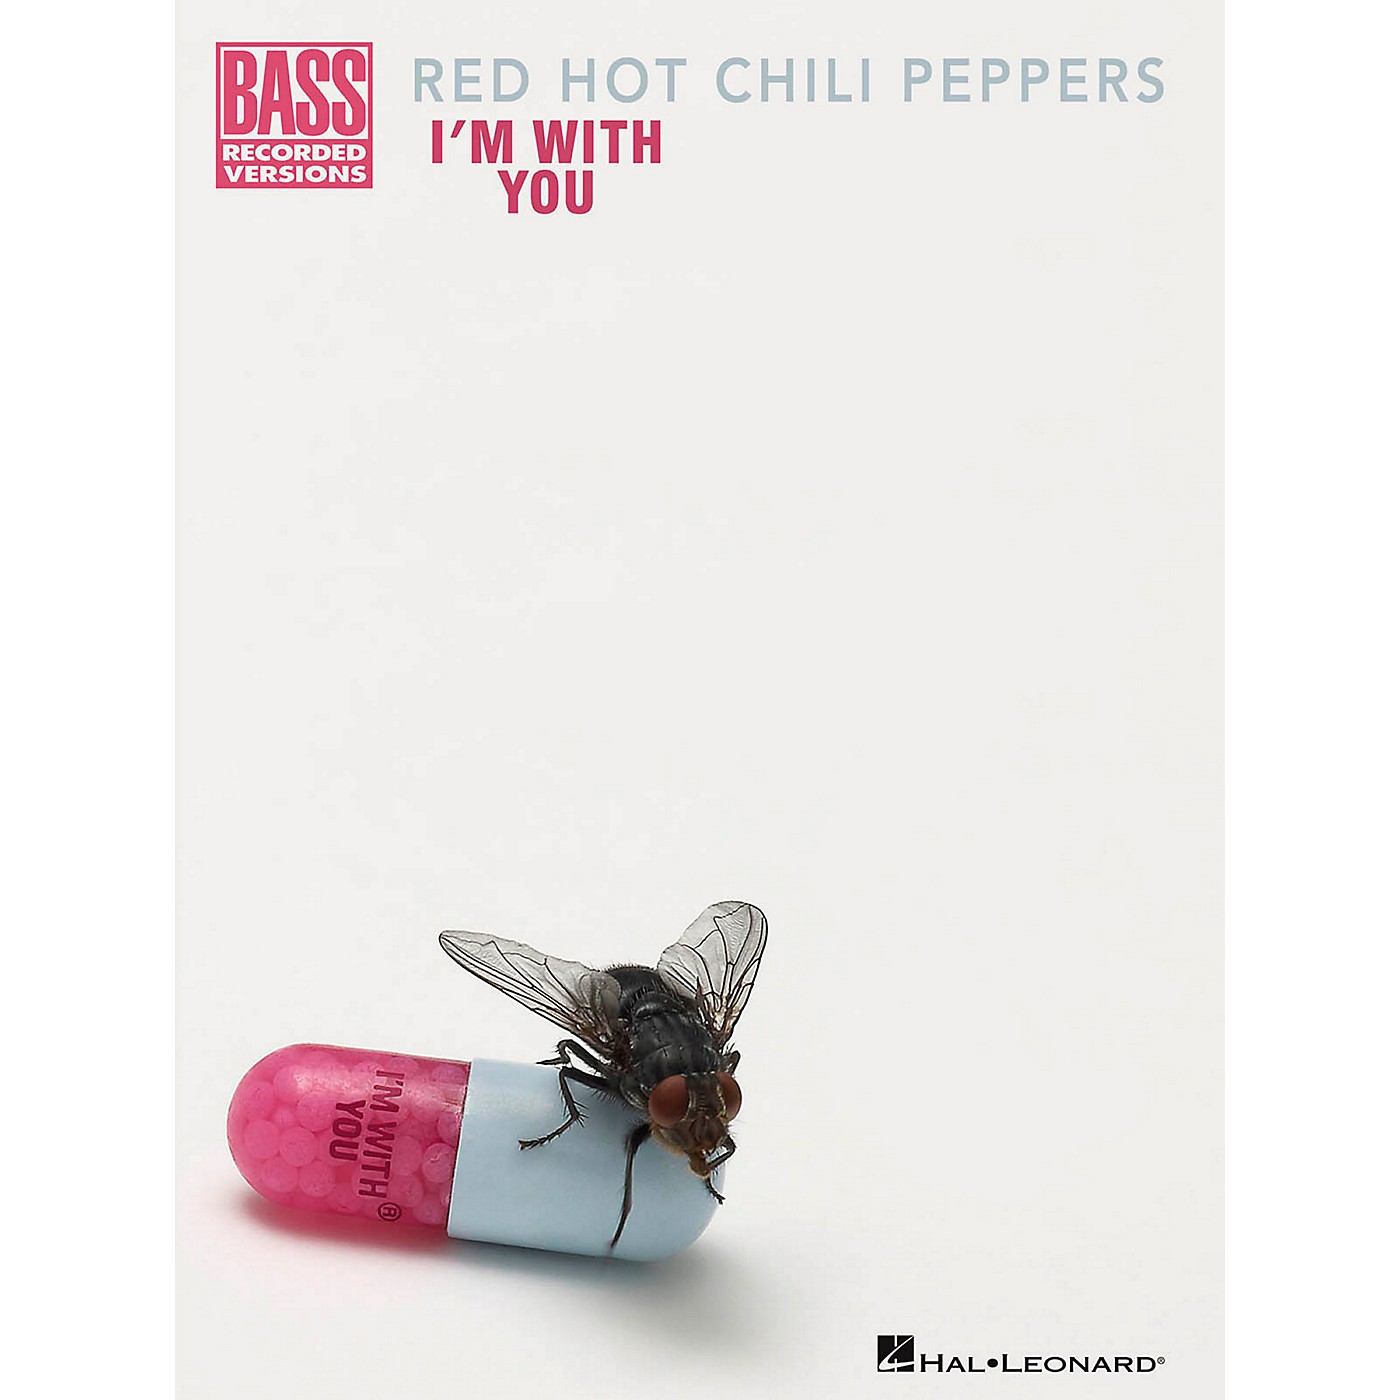 Hal Leonard Red Hot Chili Peppers - I'm With You Bass Guitar Tab Songbook thumbnail